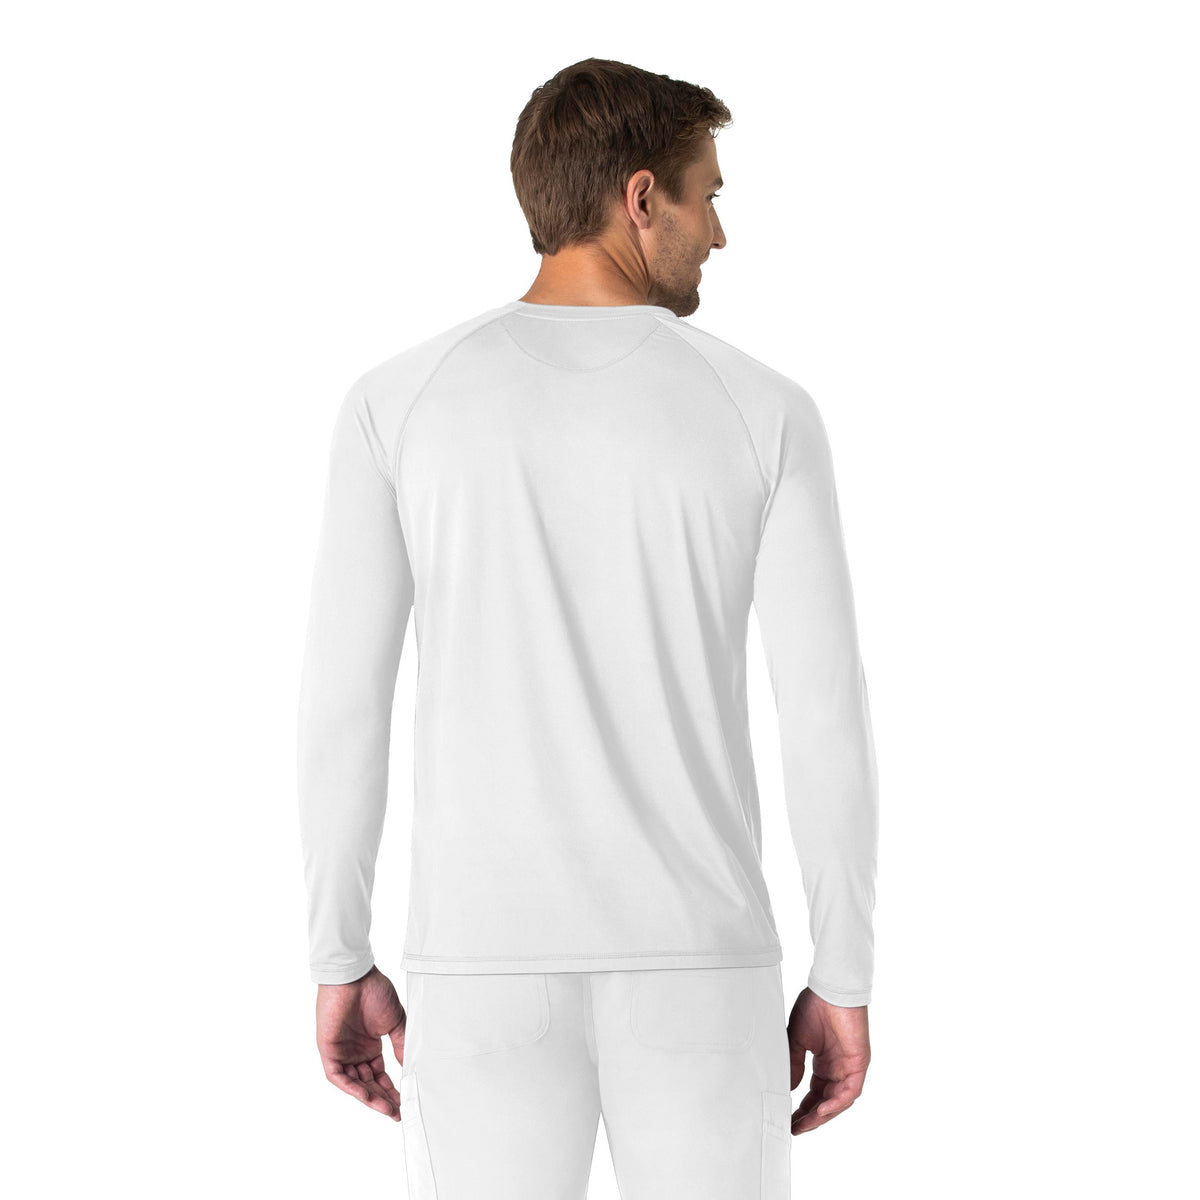 Force Sub-Scrubs Men's Performance Long Sleeve Tee White back view